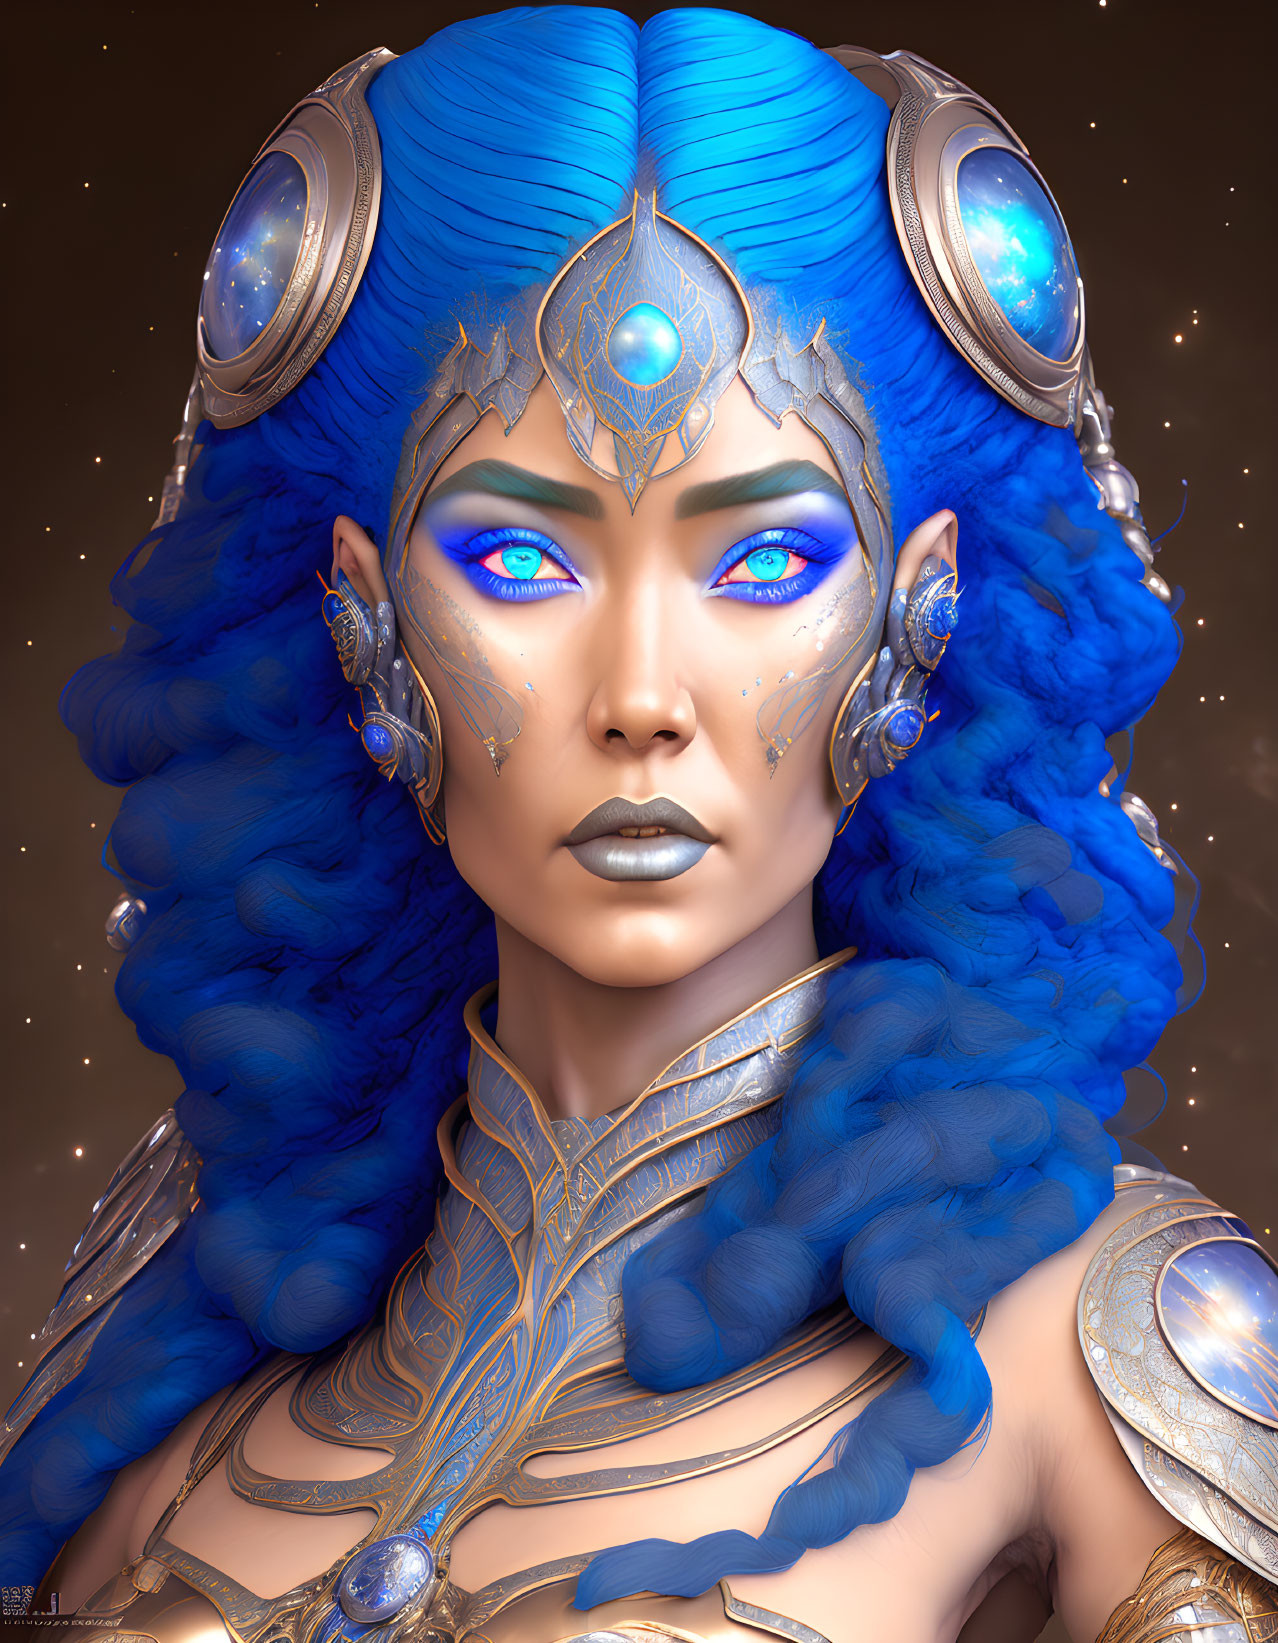 Blue-skinned woman with ornate gold-and-blue headgear and armor portrait.